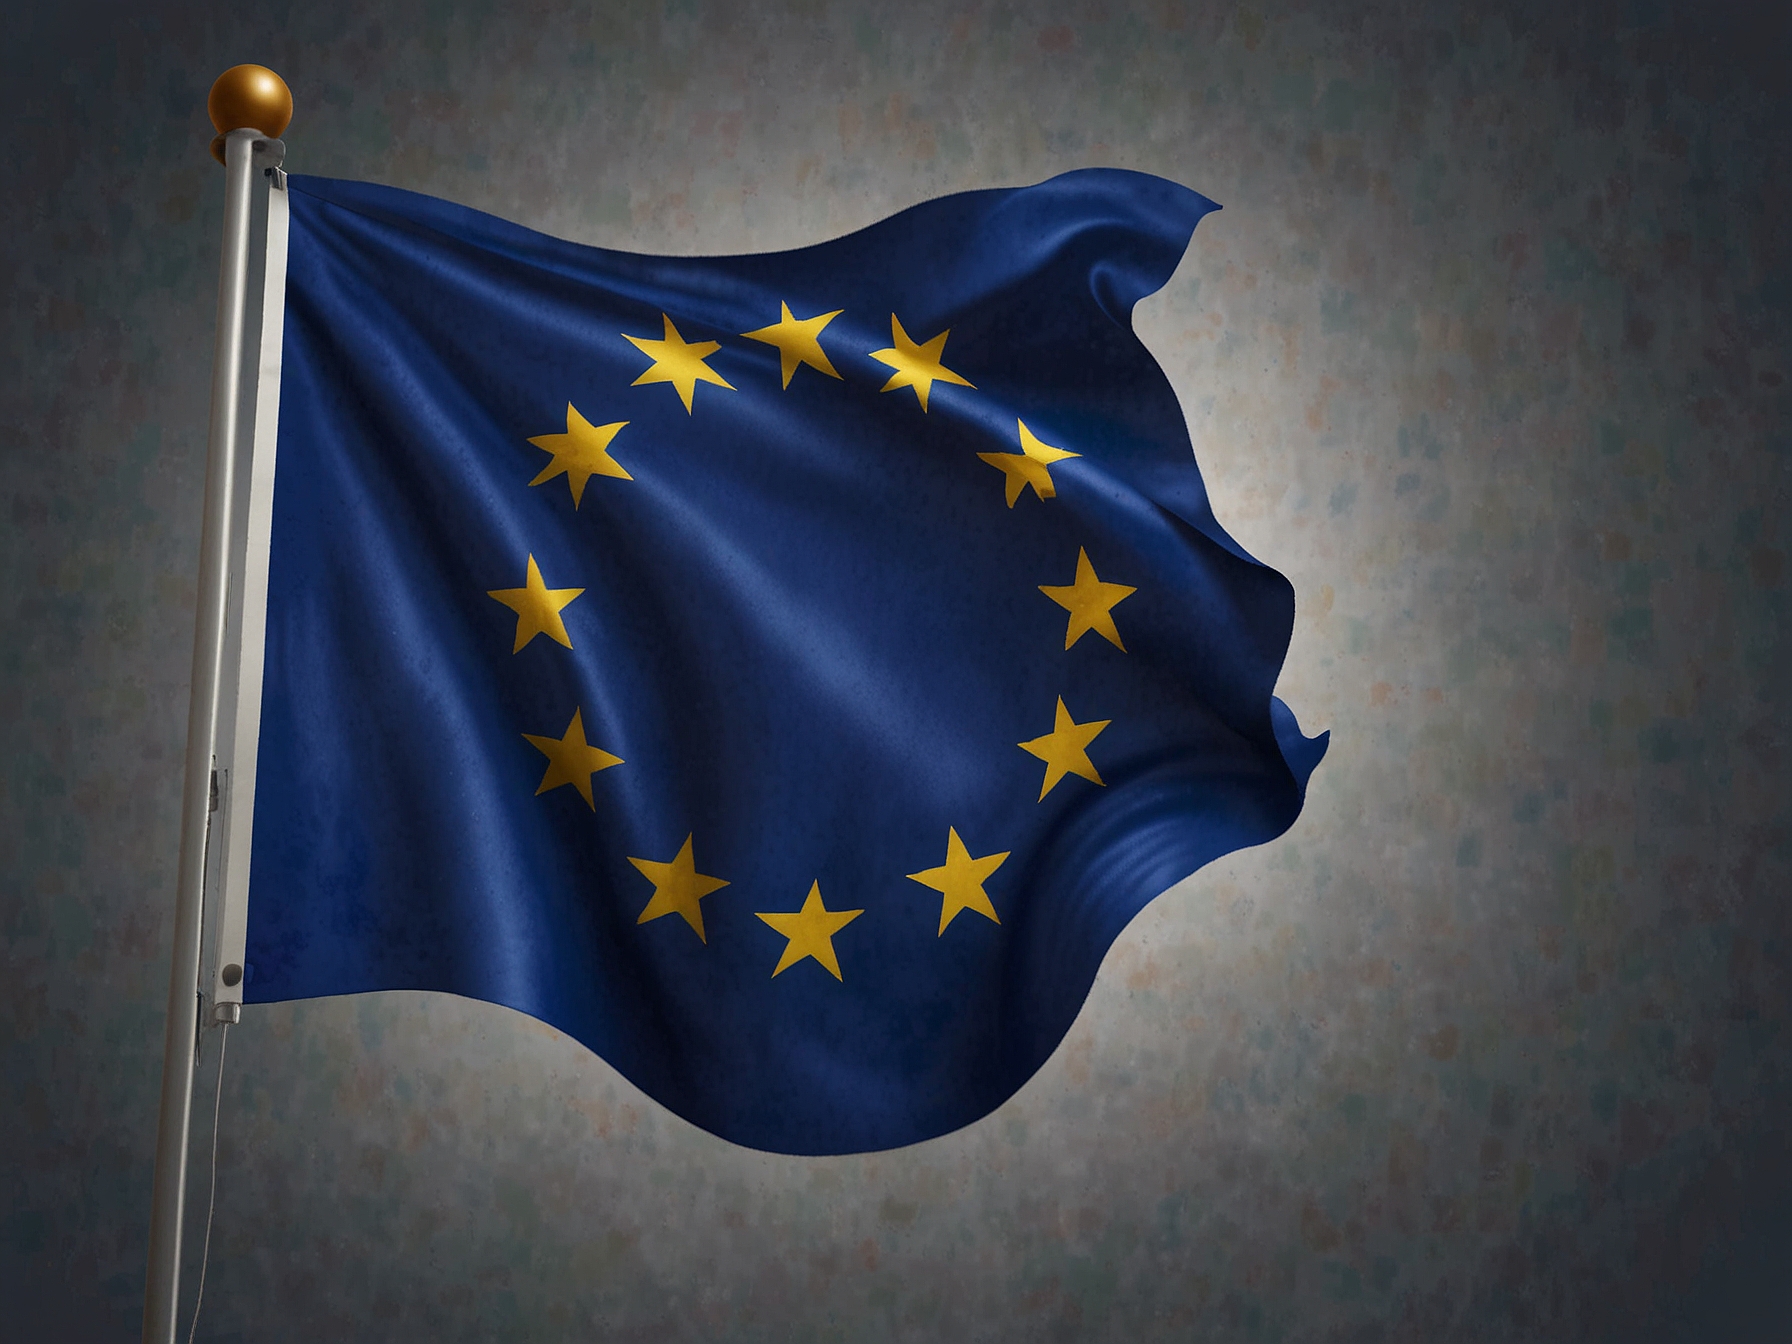 An illustration showing the European Union flag with Apple's logo in the background. This image represents the EU's investigation into Apple's App Store practices and the resultant legal actions.